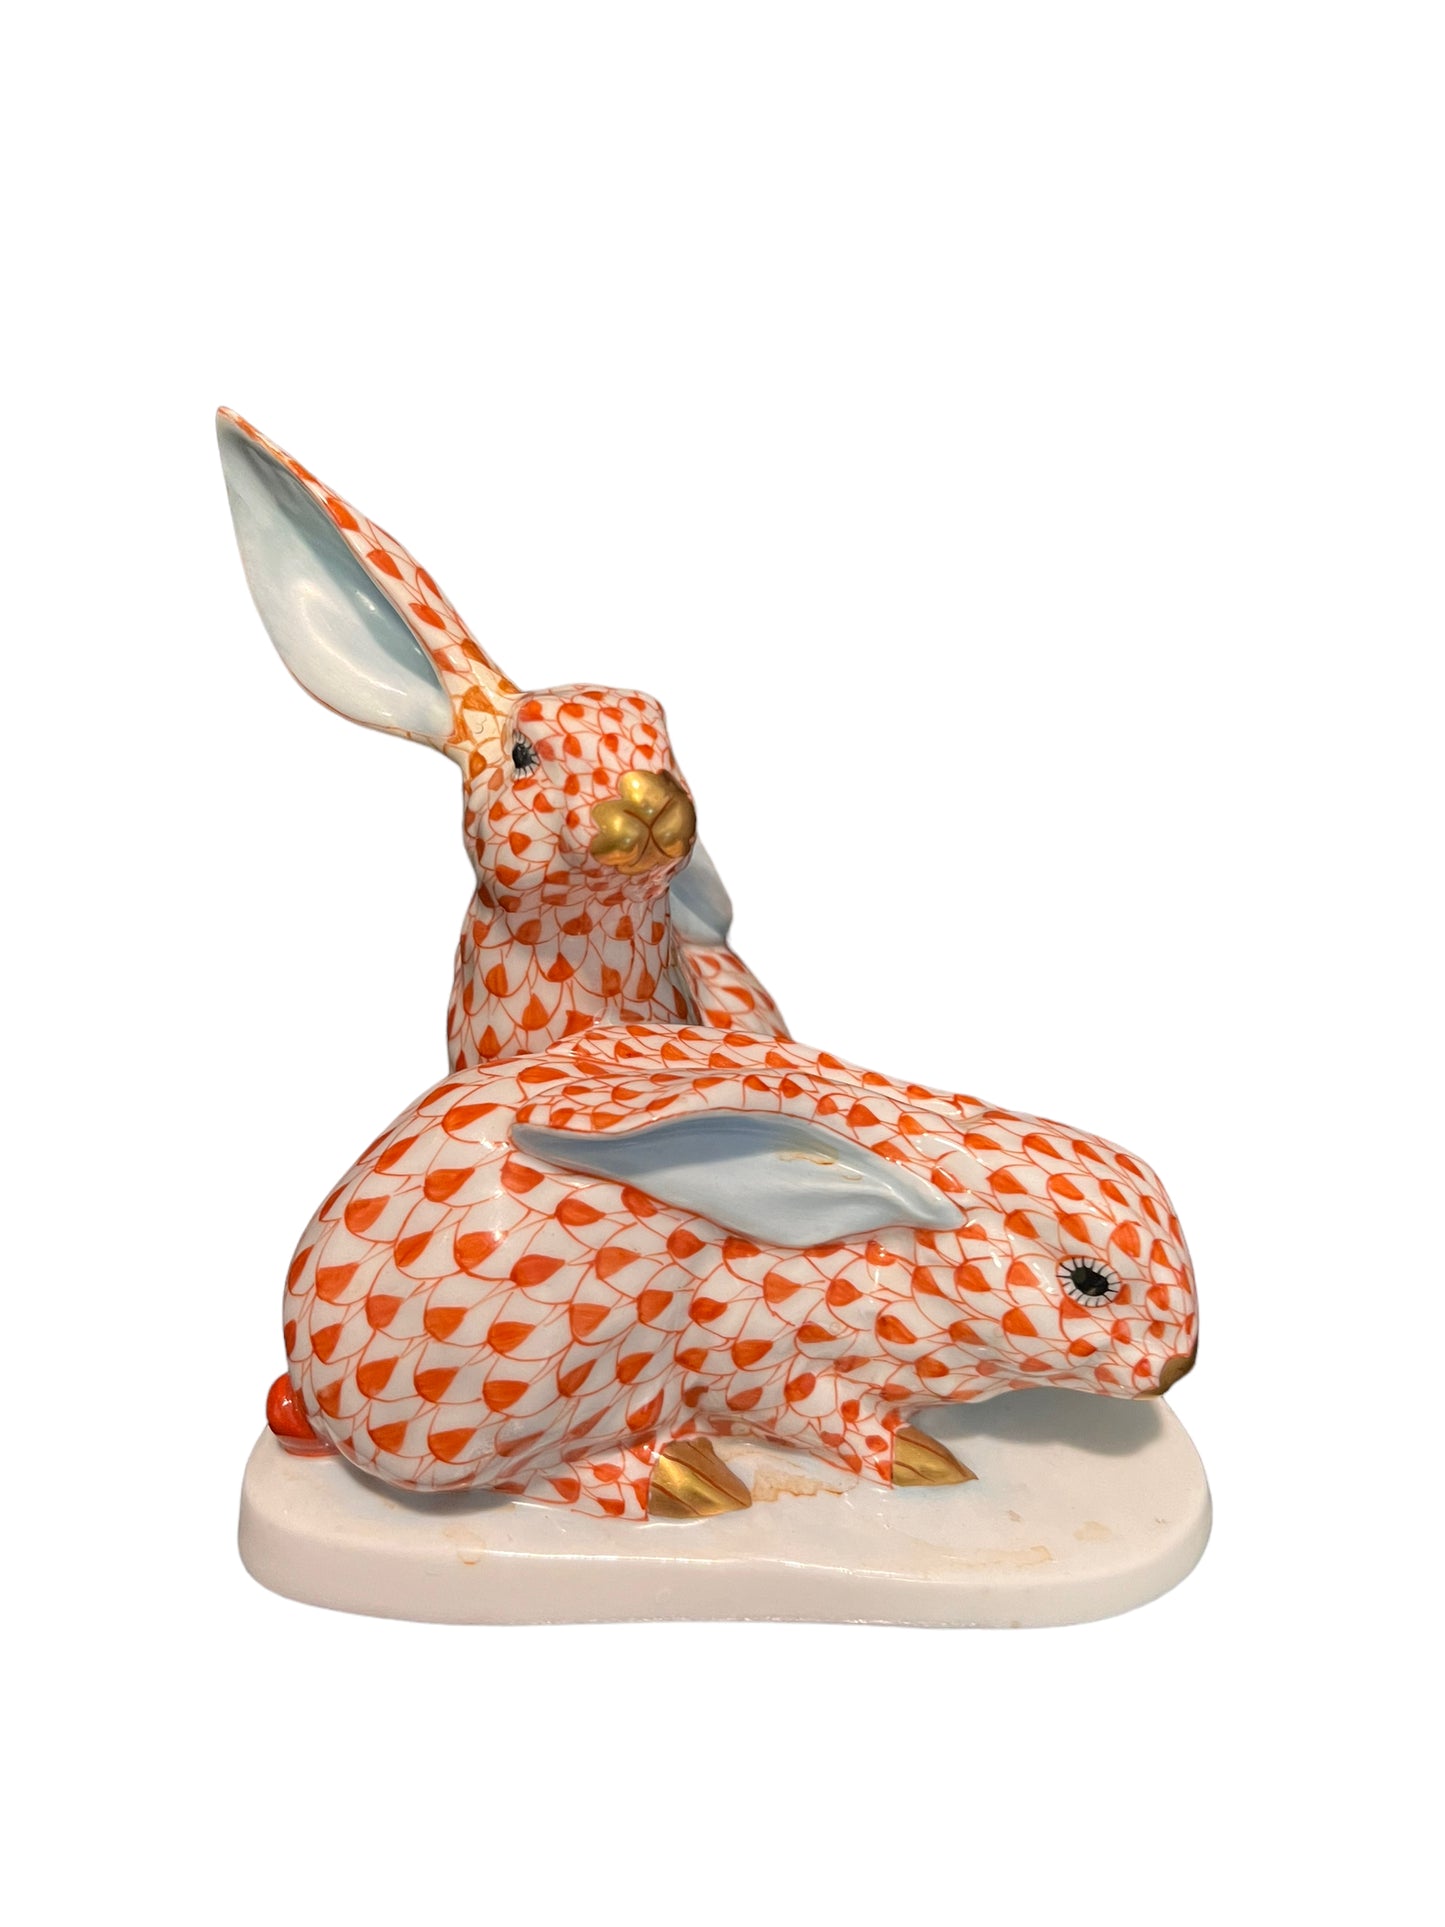 Herend Porcelain Bunnies Rust with Gold Trim